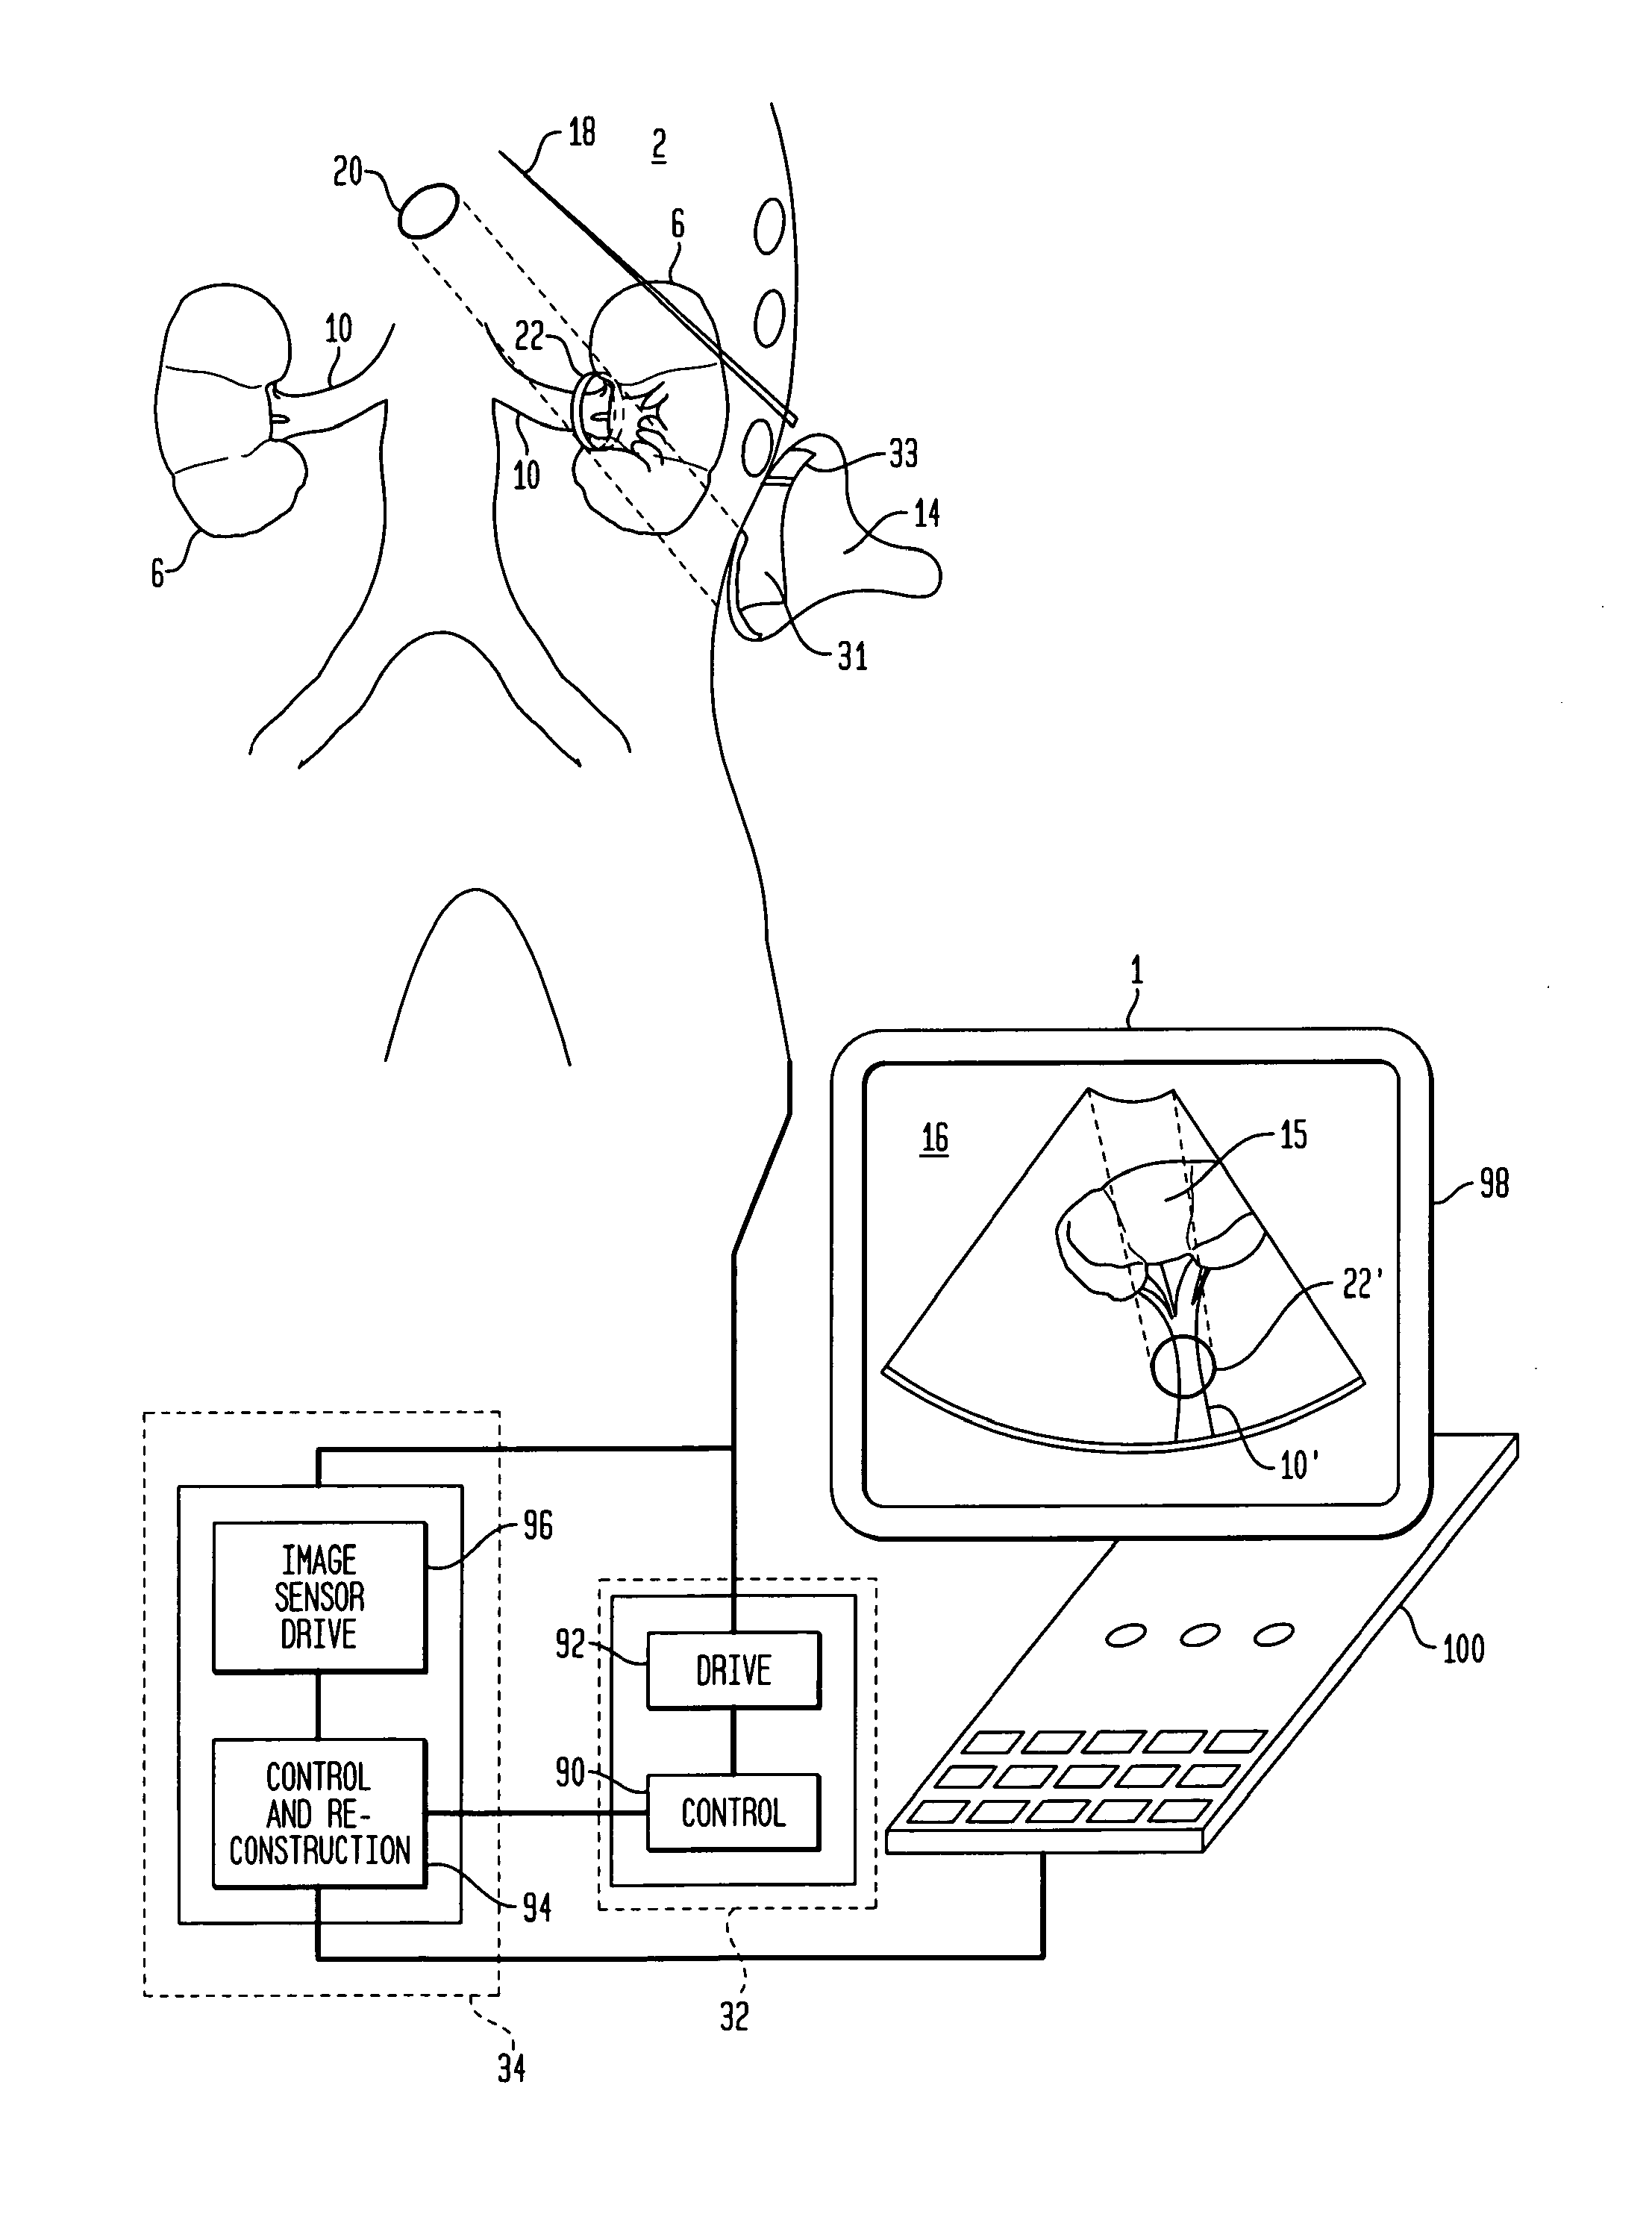 Method and apparatus for non-invasive treatment of hypertension through ultrasound renal denervation